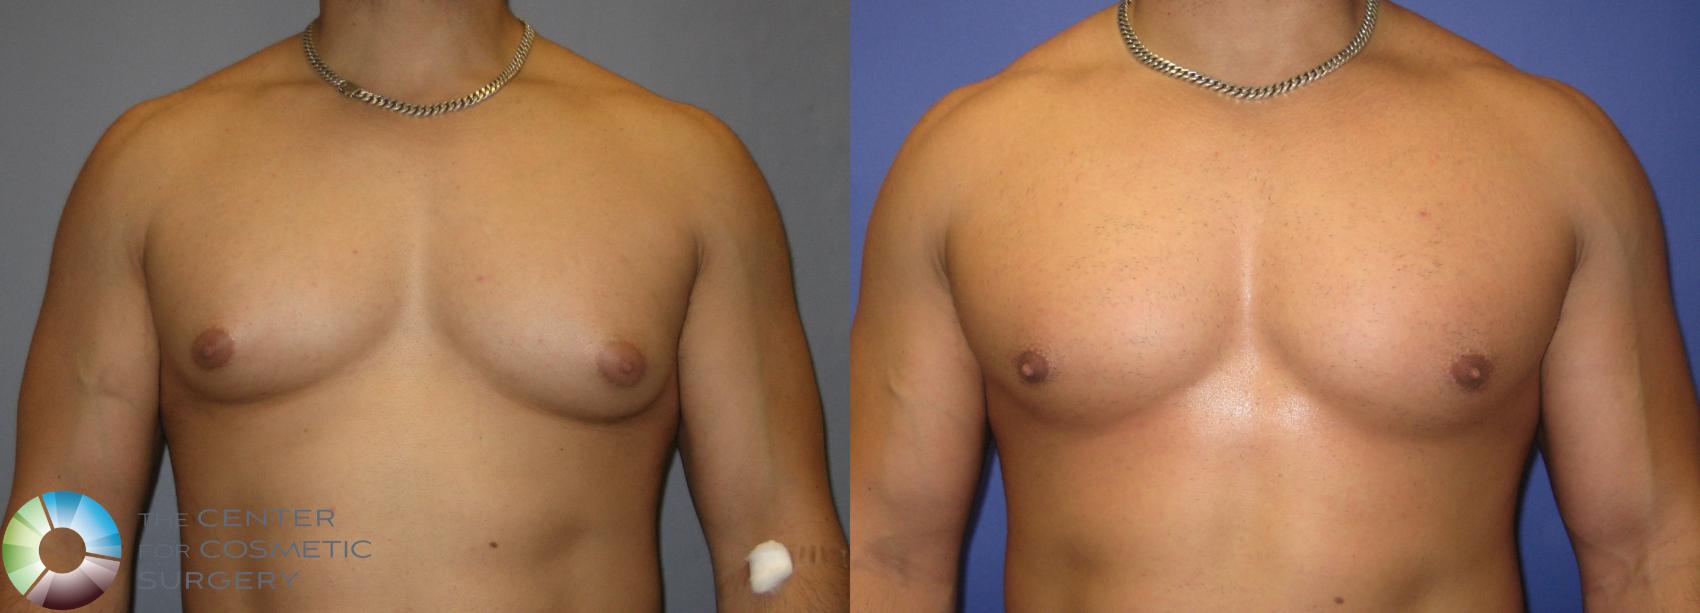 Before & After Liposuction Case 301 View #1 in Denver, CO